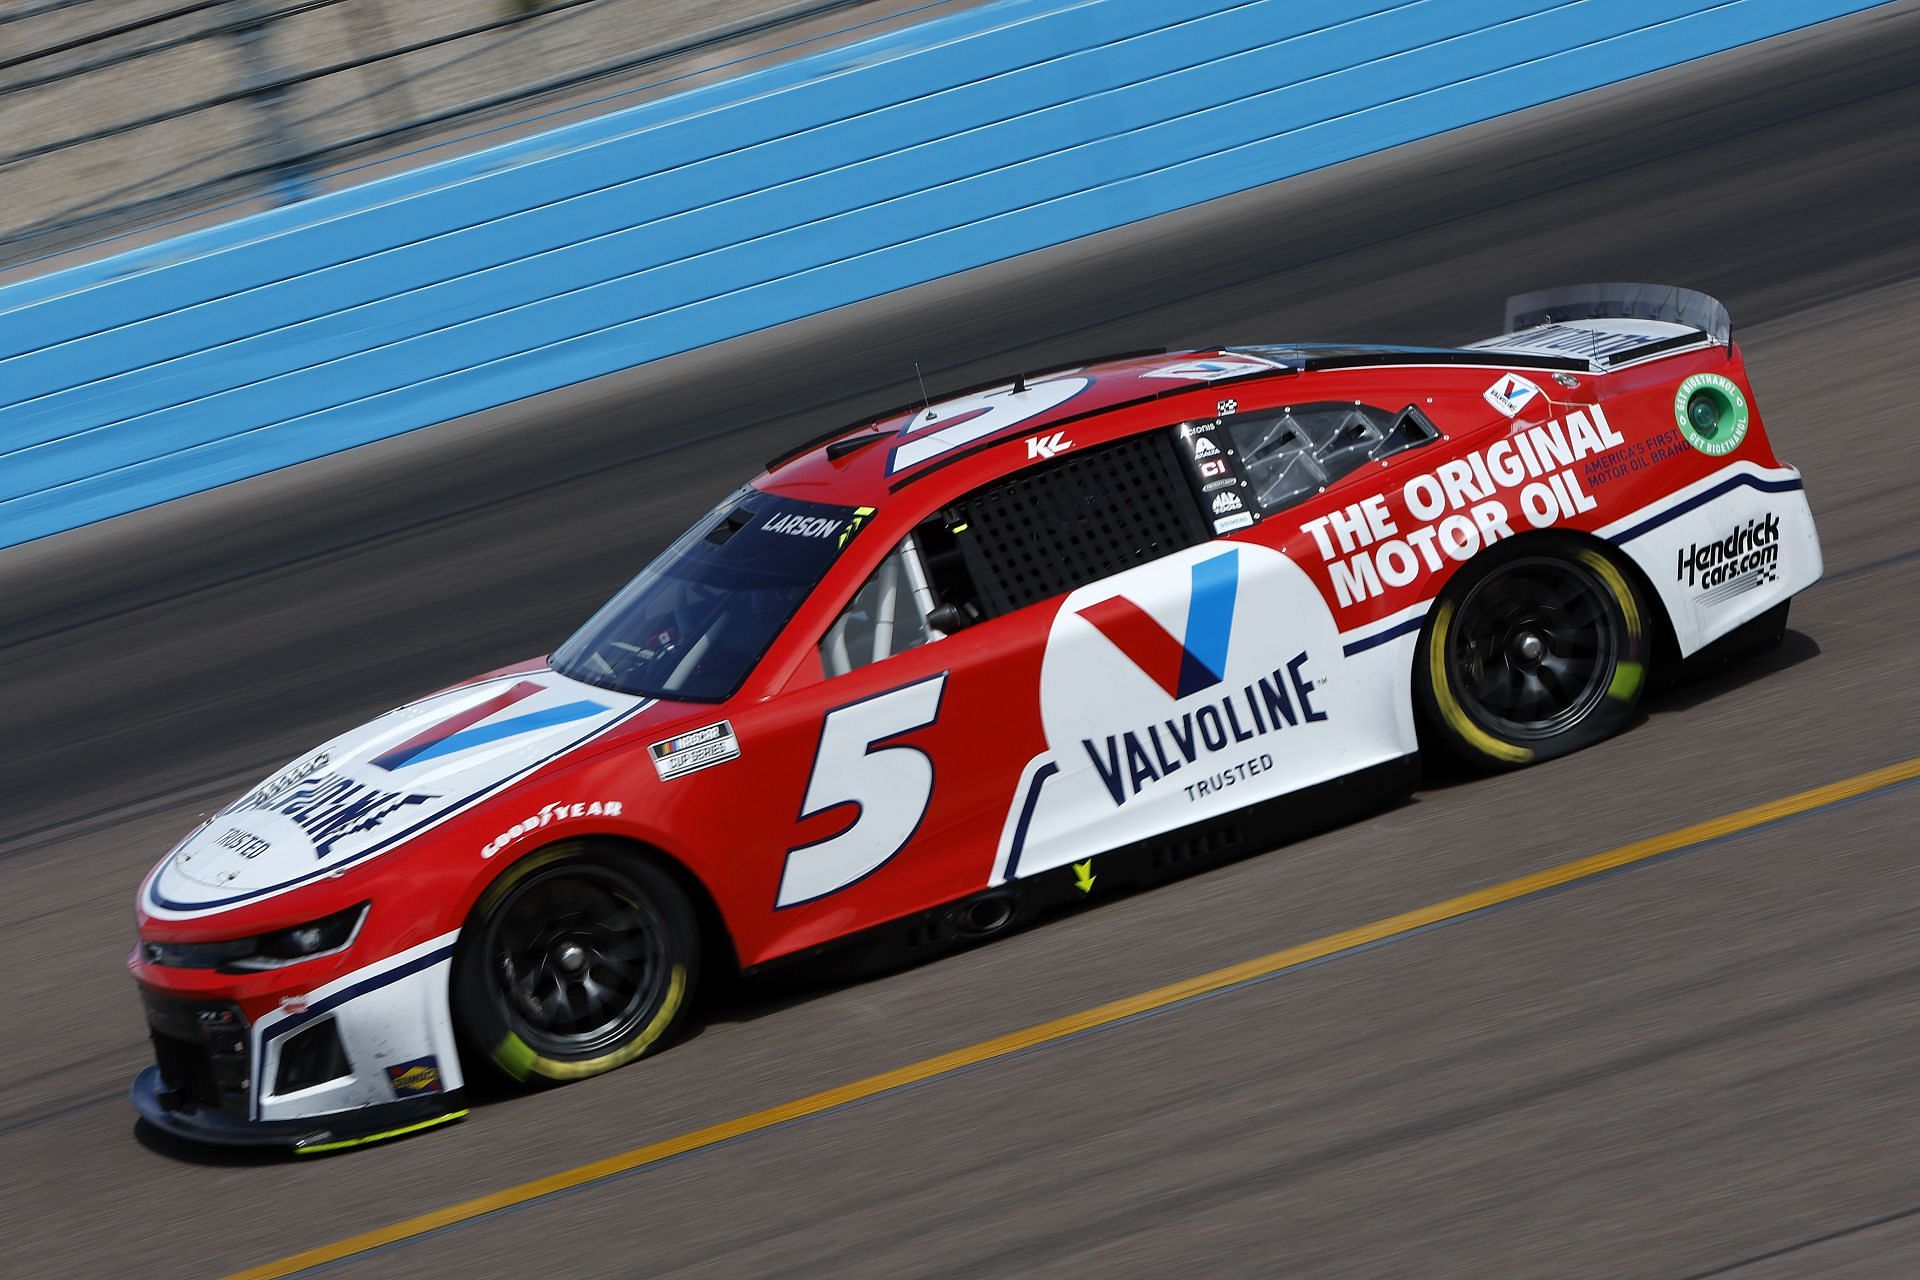 Kyle Larson drives his #5 Valvoline Chevrolet Camaro ZL1 during the Ruoff Mortgage 500 at Phoenix Raceway in Avondale, Arizona. (Photo by Sean Gardner/Getty Images)